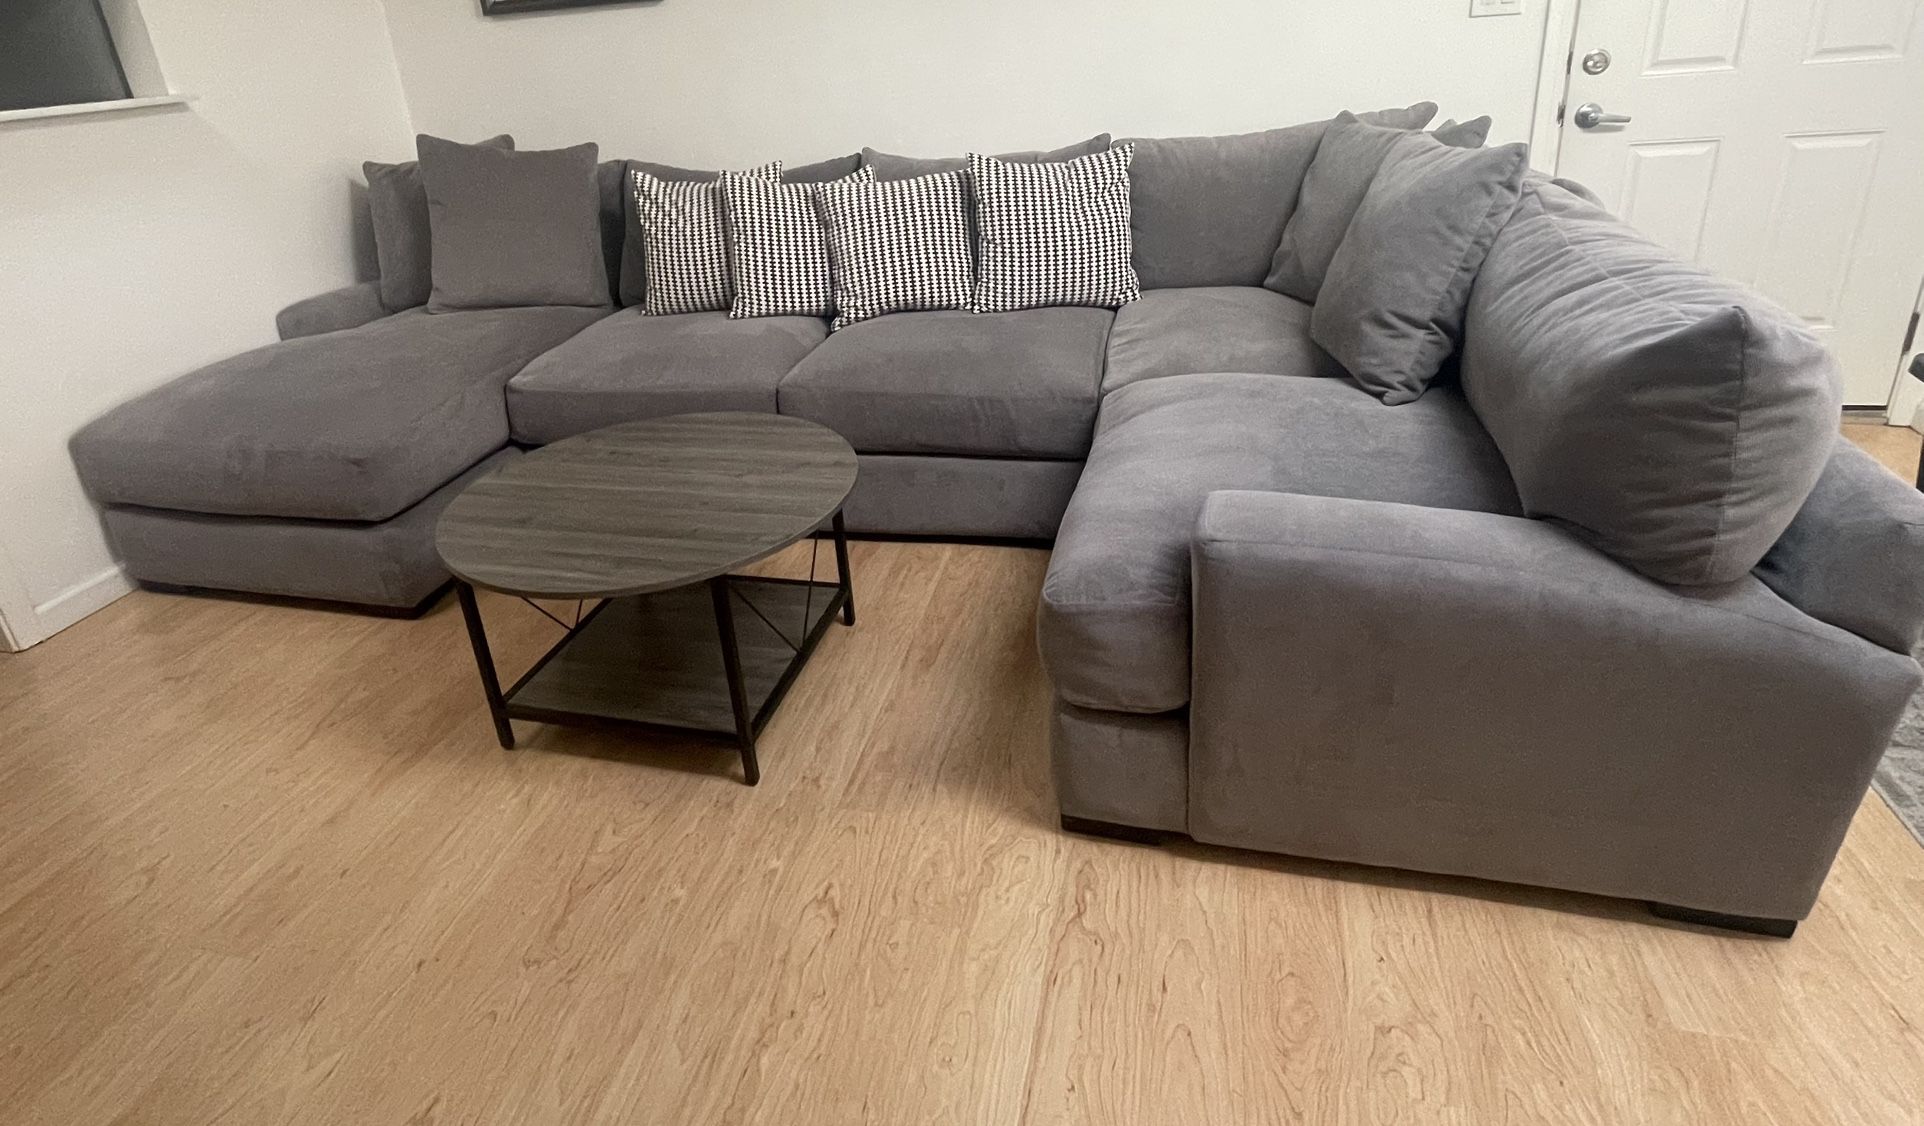 4-Pc. Fabric Chaise Sectional Sofa and Coffee Table